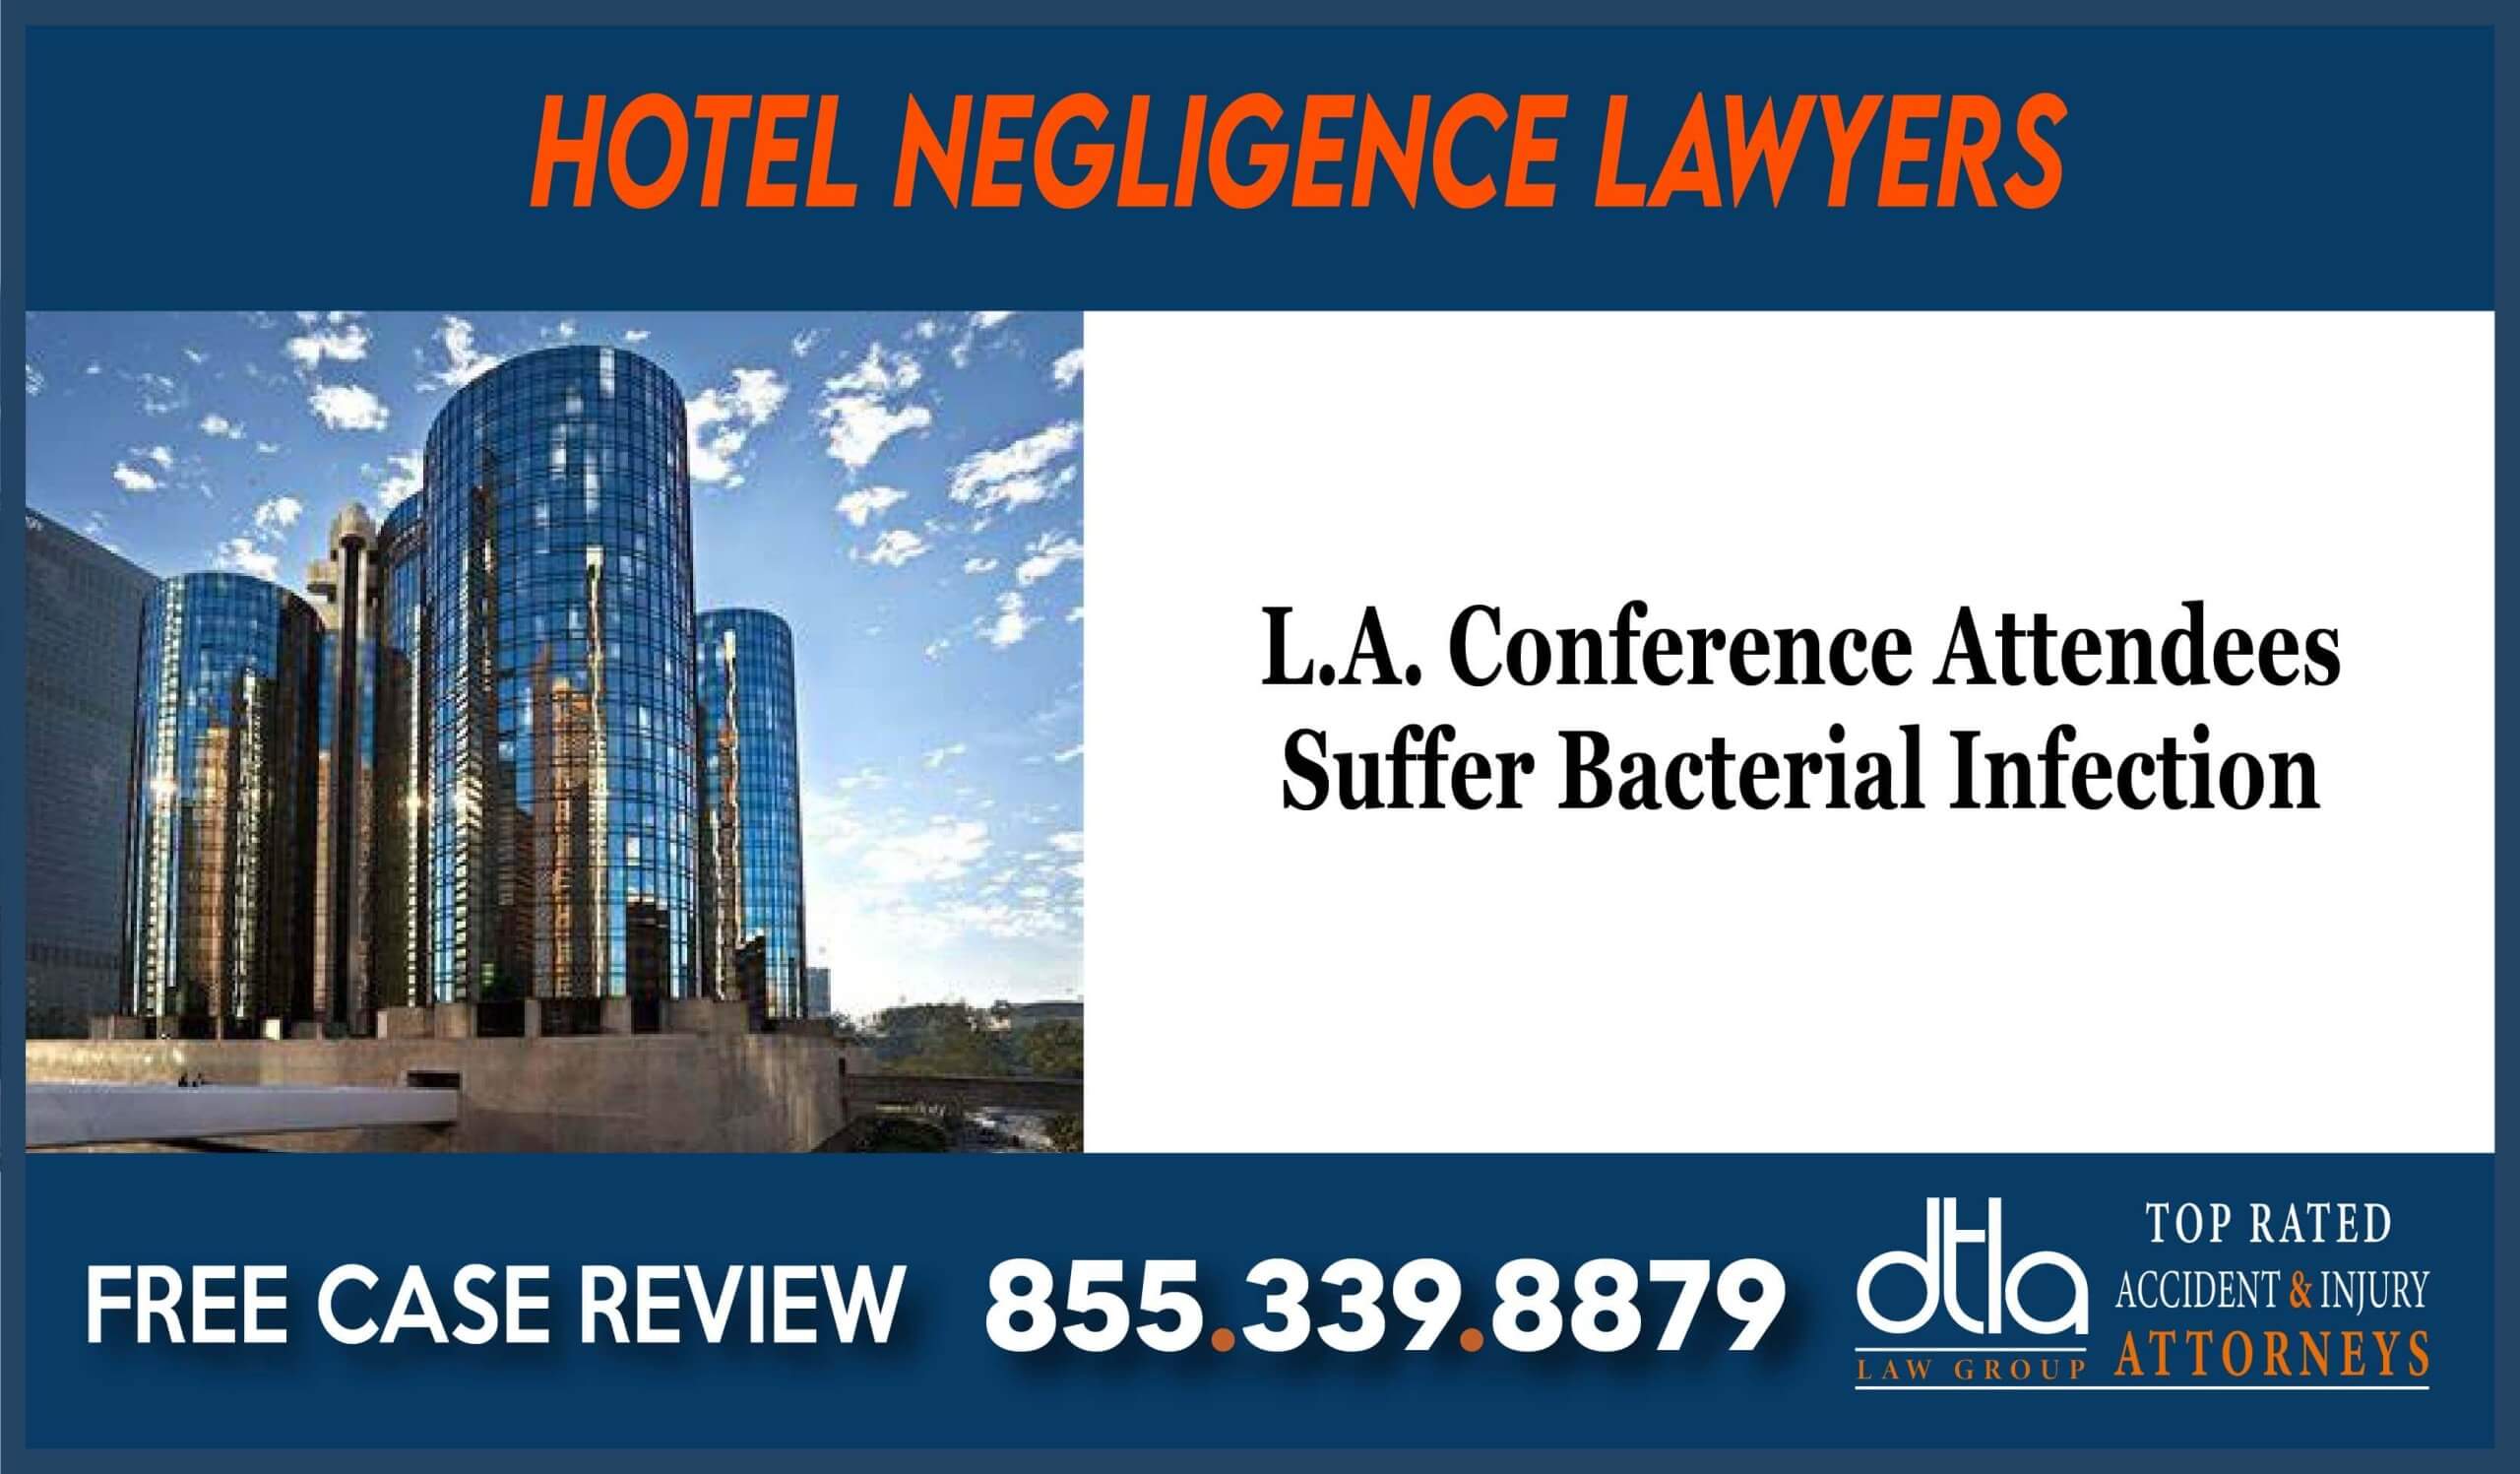 LA Conference Attendees Suffer Bacterial Infection Hotel Negligence Lawyers lawsuit attorney sue